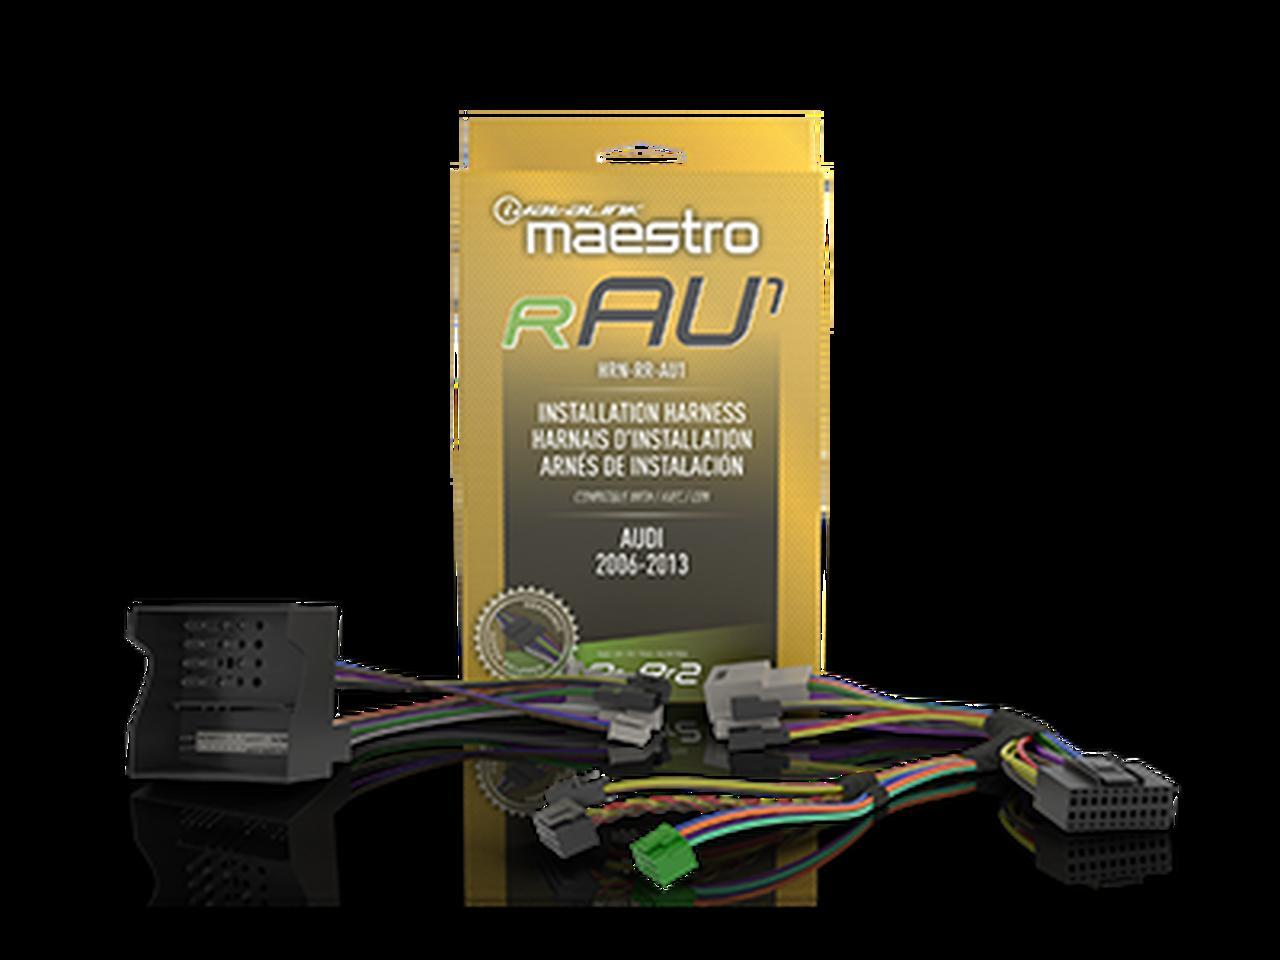 iDatalink Maestro HRN-RR-AU1 Plug and Play T-Harness for select Audi Vehicles